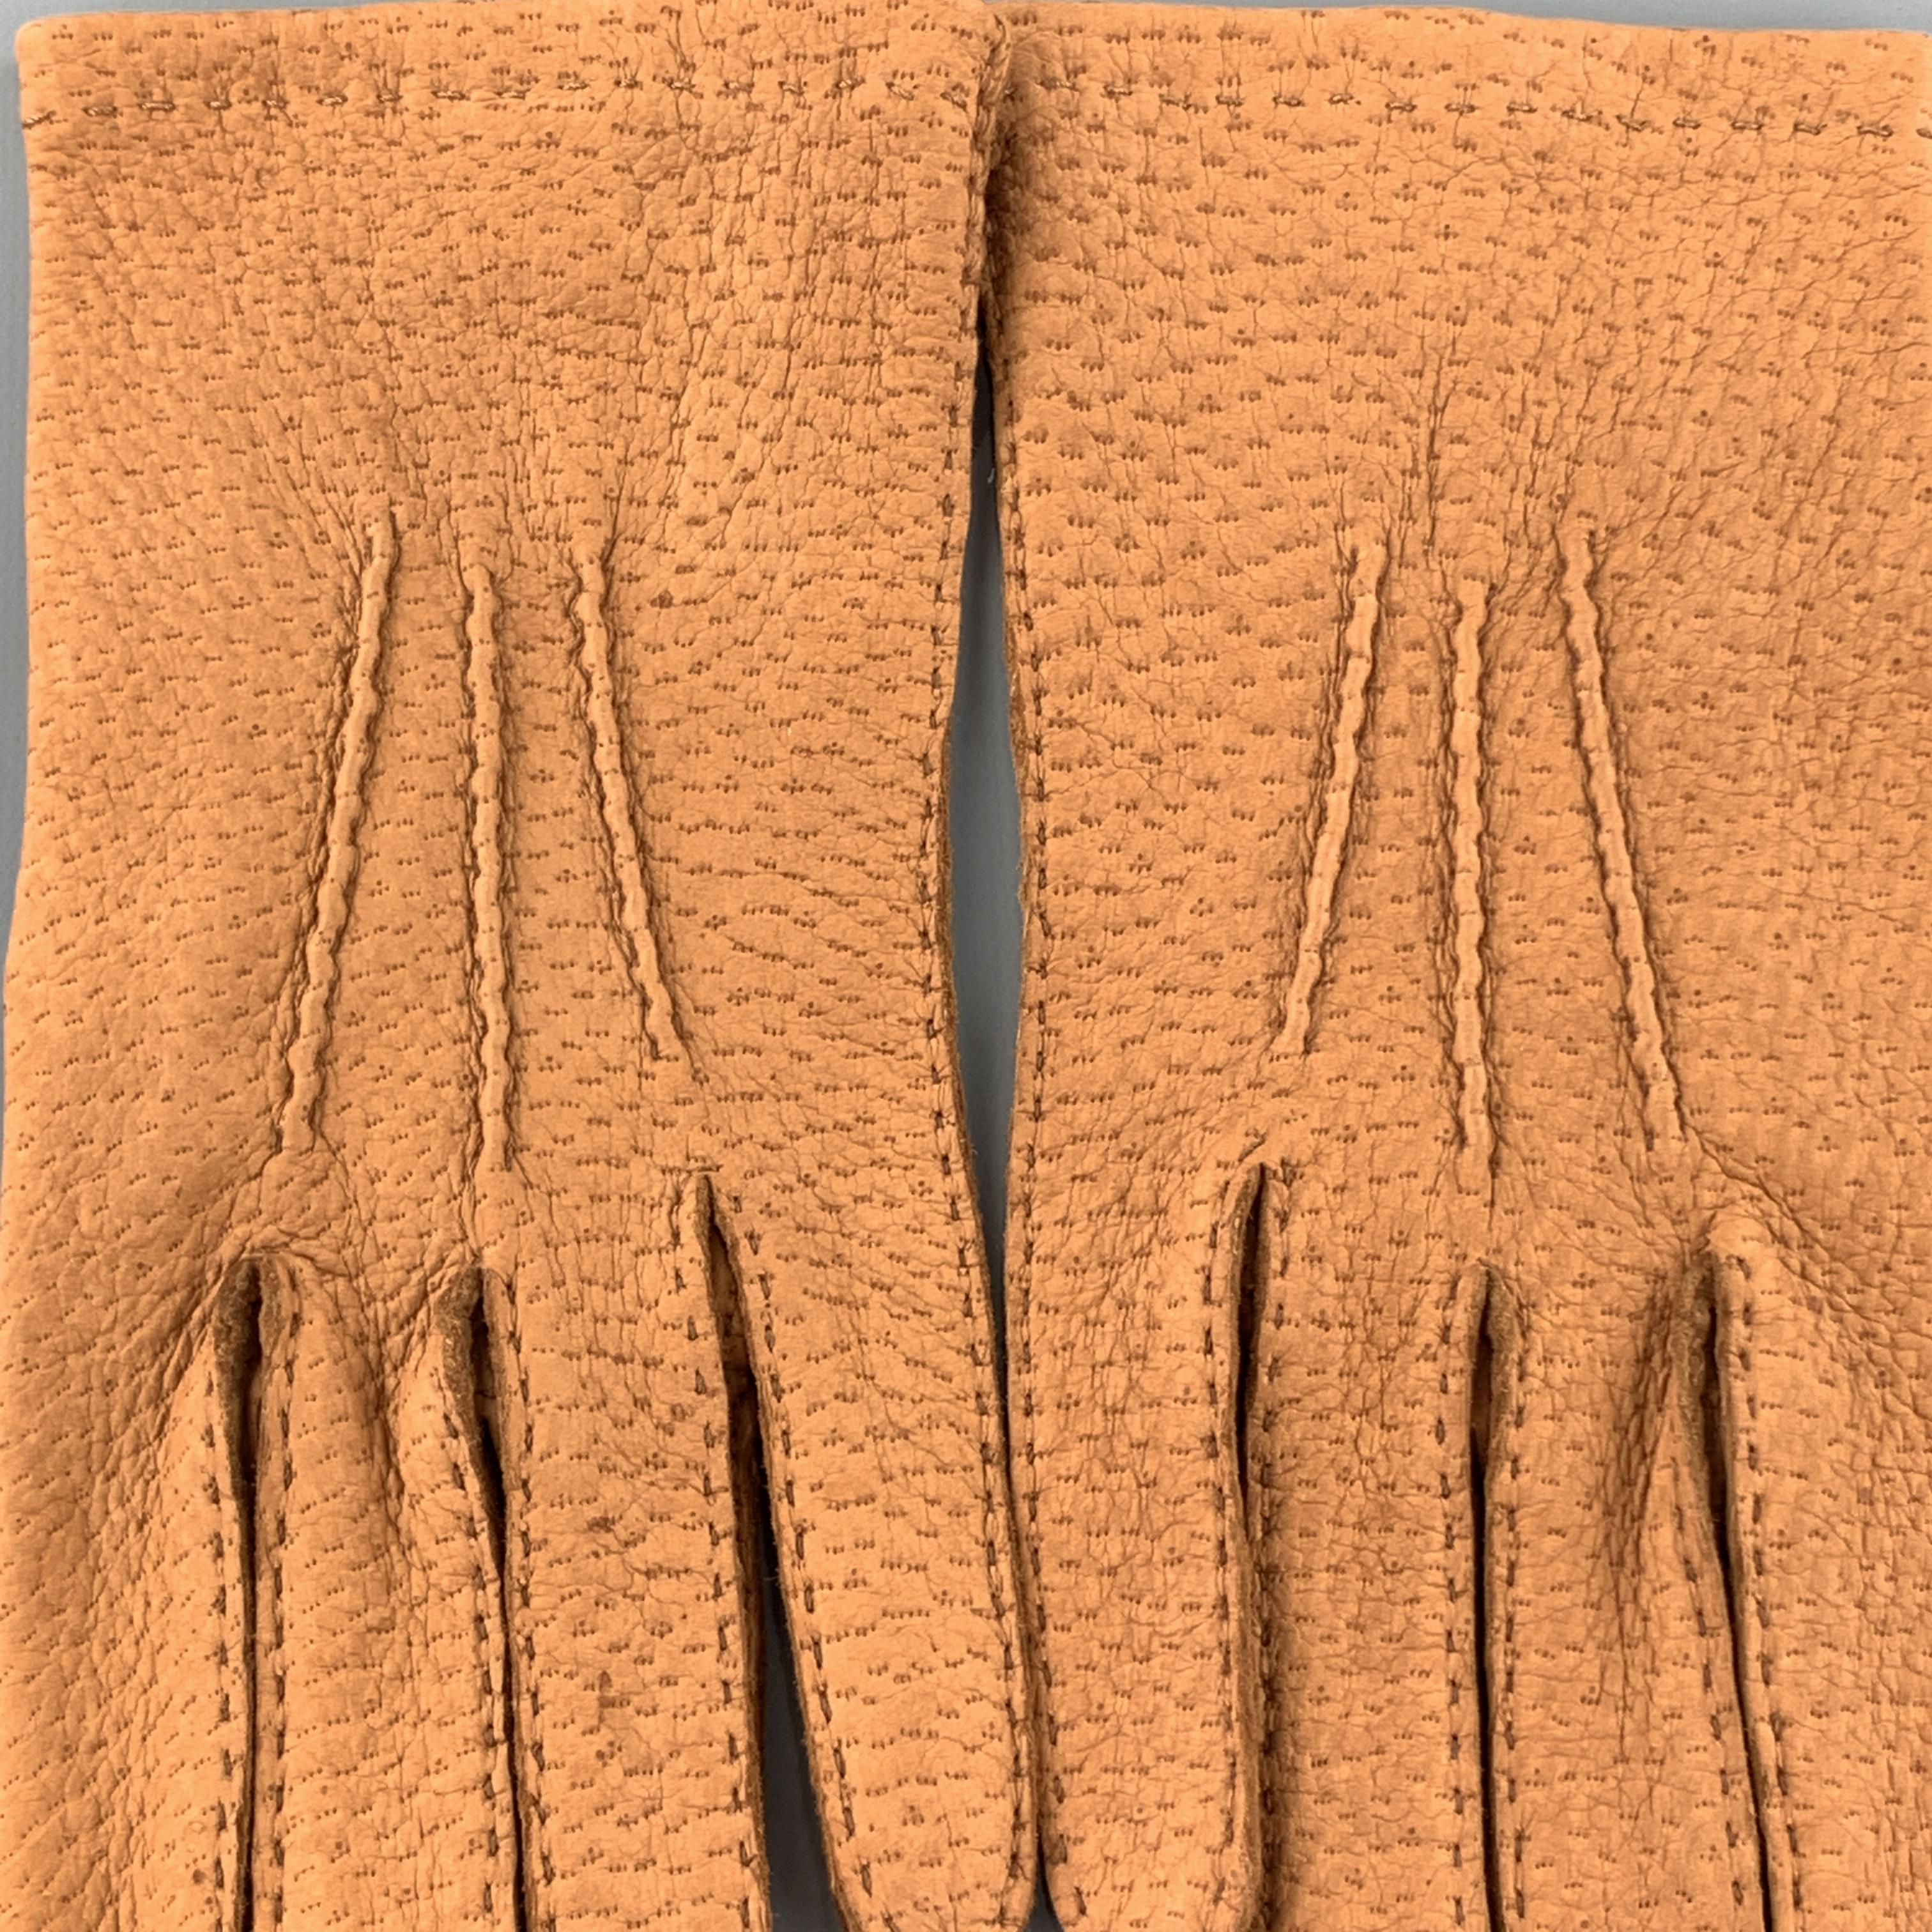 Vintage BUDD gloves come in tan hogskin leather with top stitching. Made in England.

Excellent Pre-Owned Condition.
Marked: 9

Width: 4 in.
Length: 10 in.